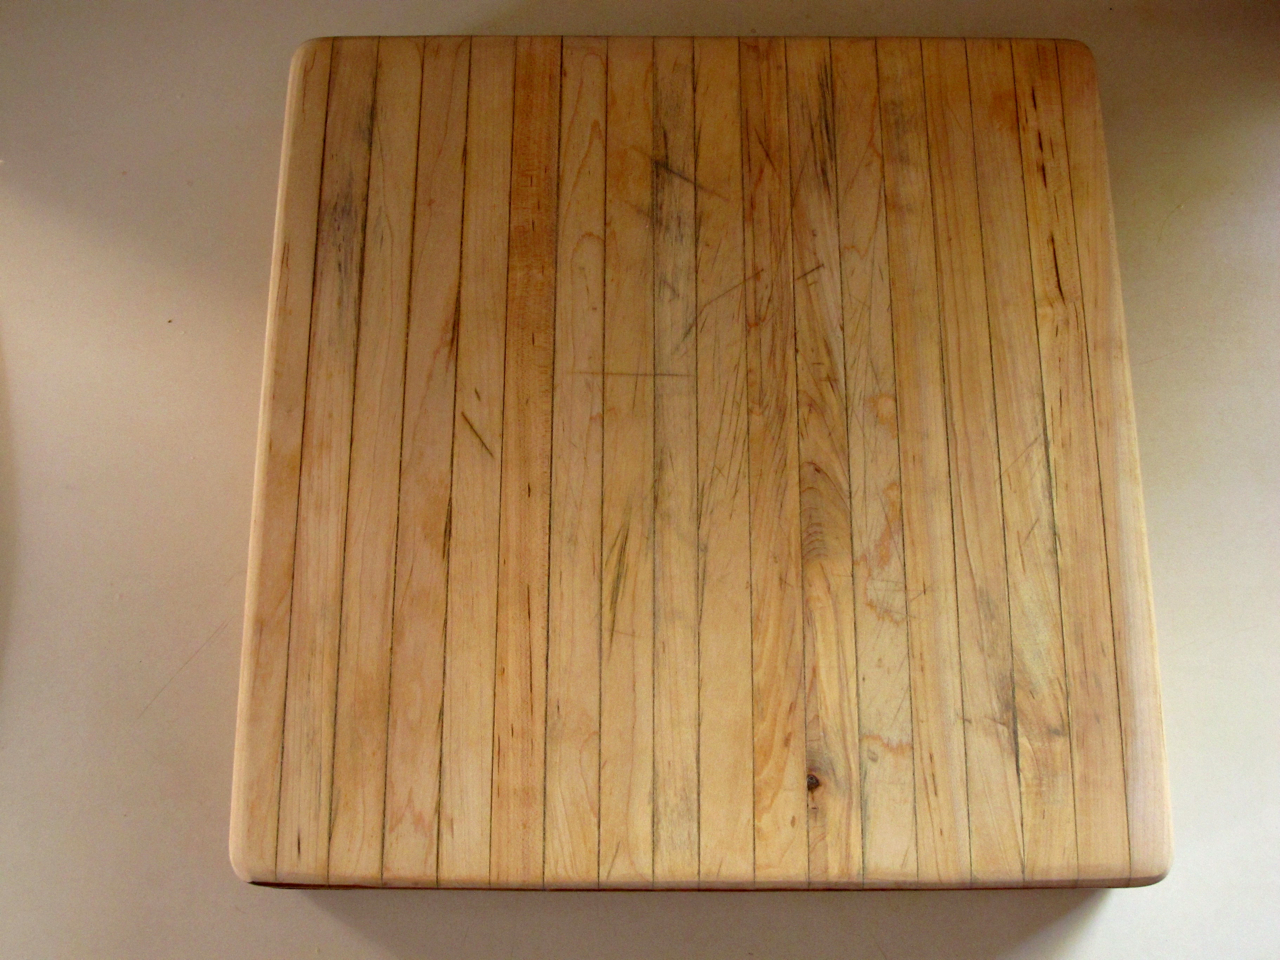 http://www.popularwoodworking.com/wp-content/uploads/The-best-finish-for-a-cutting-board-is-no-finish.jpg